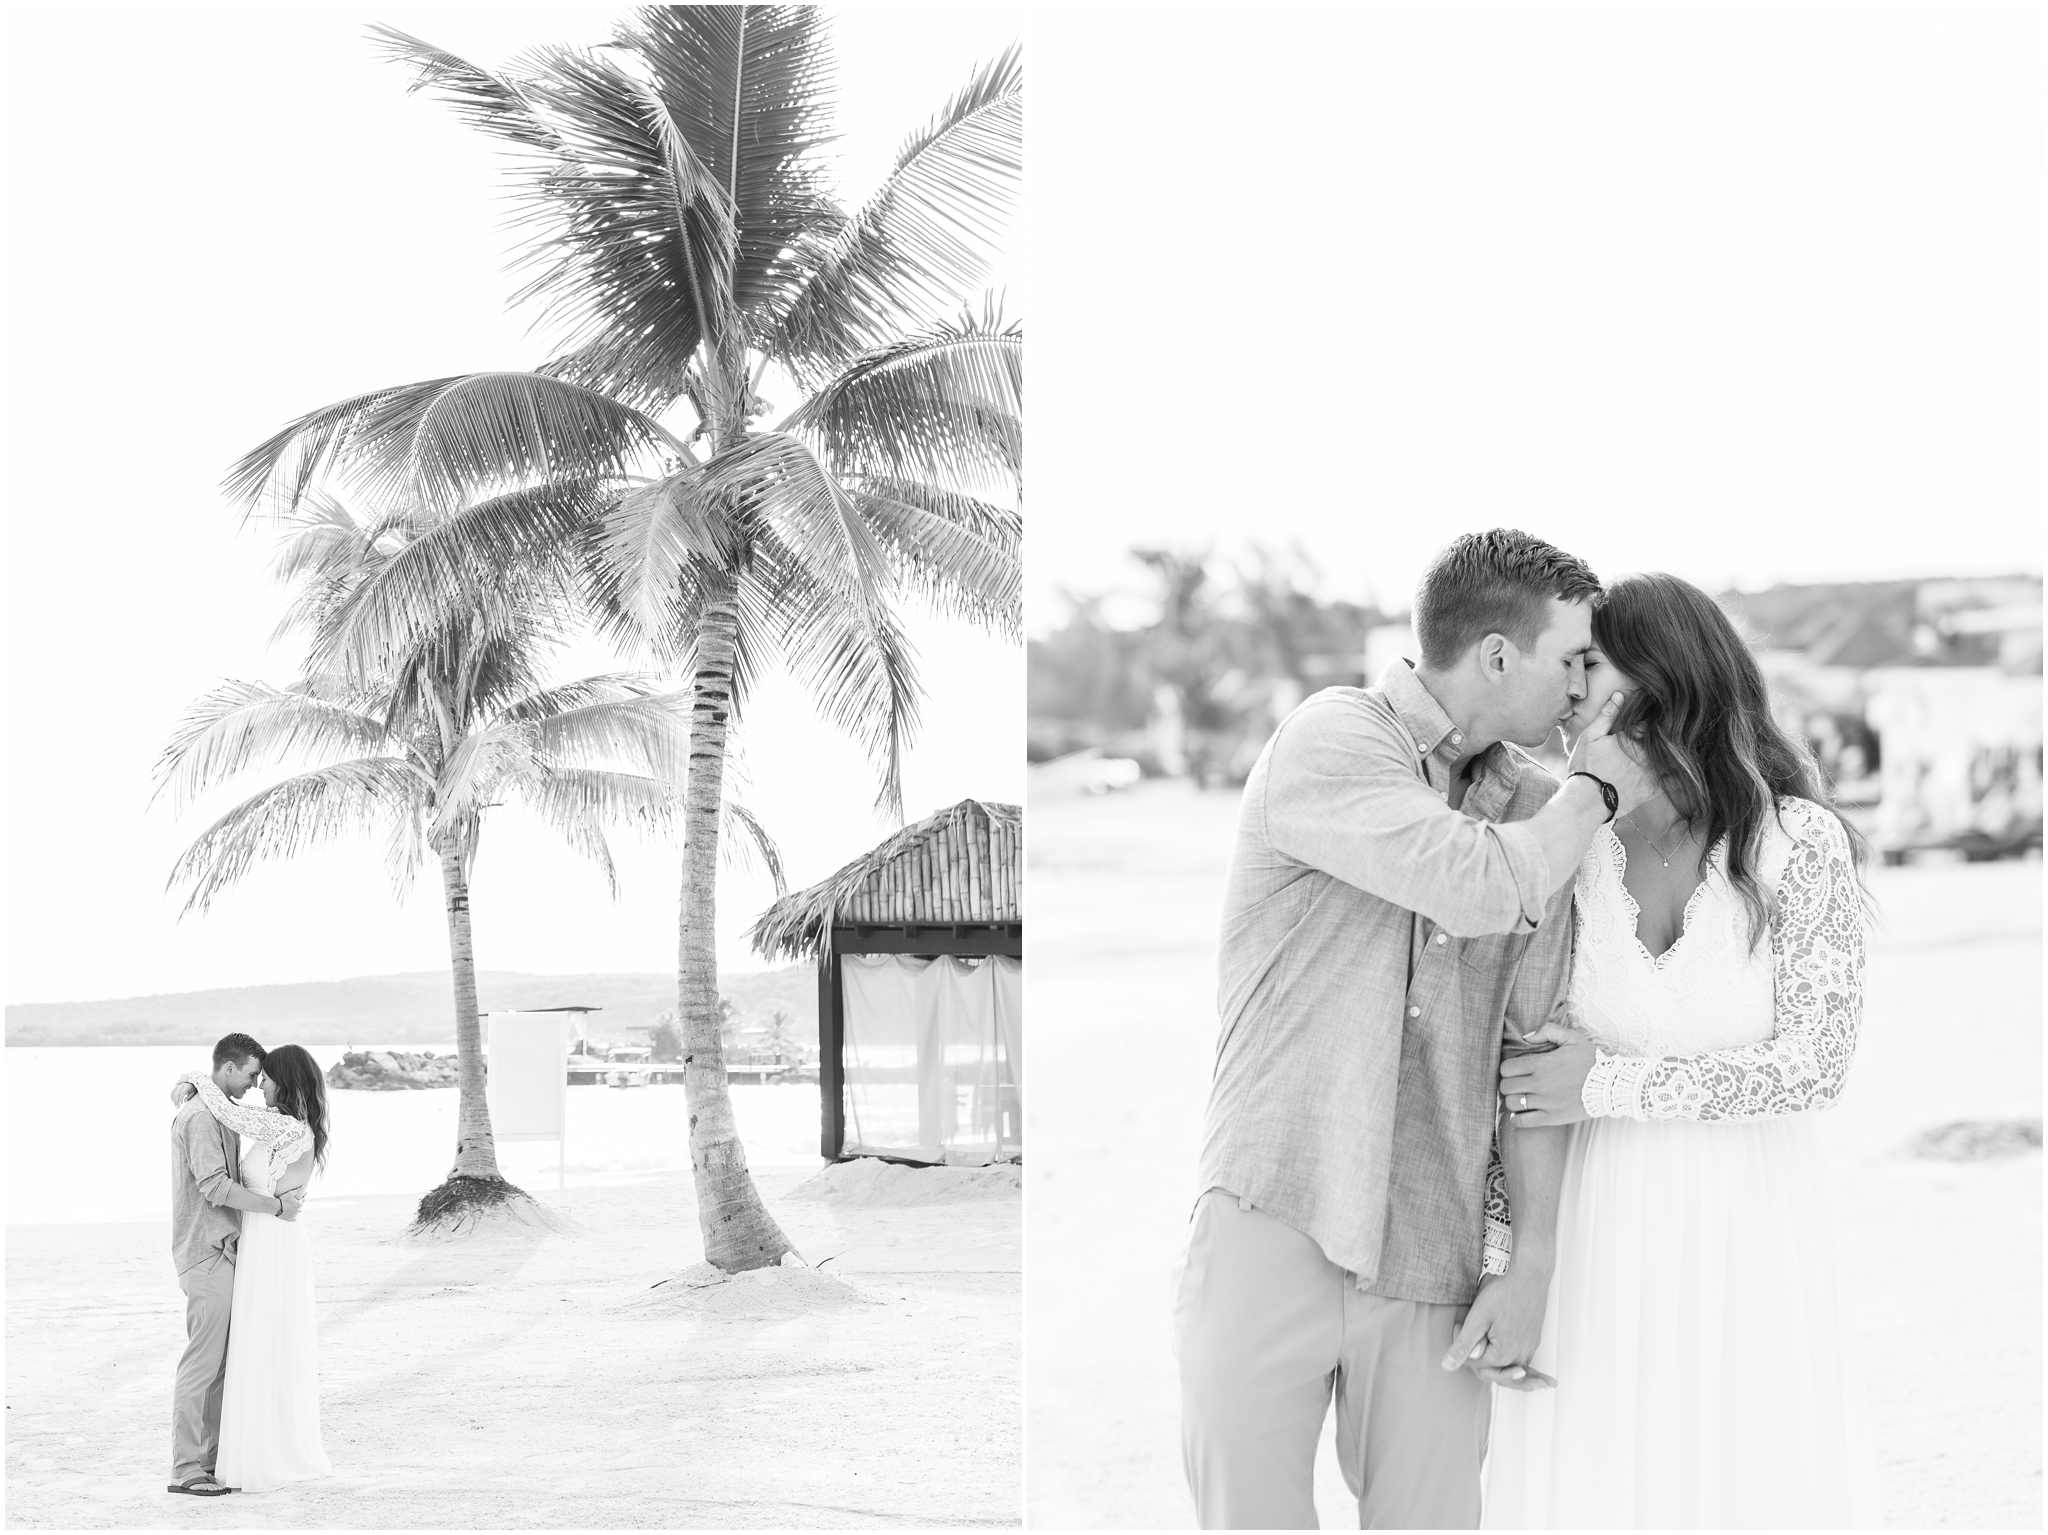 This Montego Bay Engagement Session was captured by Montego Bay Wedding Photographer Taylor Rose Photography at the Royalton Blue Waters resort in Montego Bay, Jamaica. The session took place the morning before Nik and Angela’s Montego Bay Wedding. Taylor is a Jamaica Destination Wedding Photographer available for travel worldwide. Angela wore the Awaken My Love White Long Sleeve Lace Maxi Dress from Lulu’s as a tropical dress for their tropical engagement session.